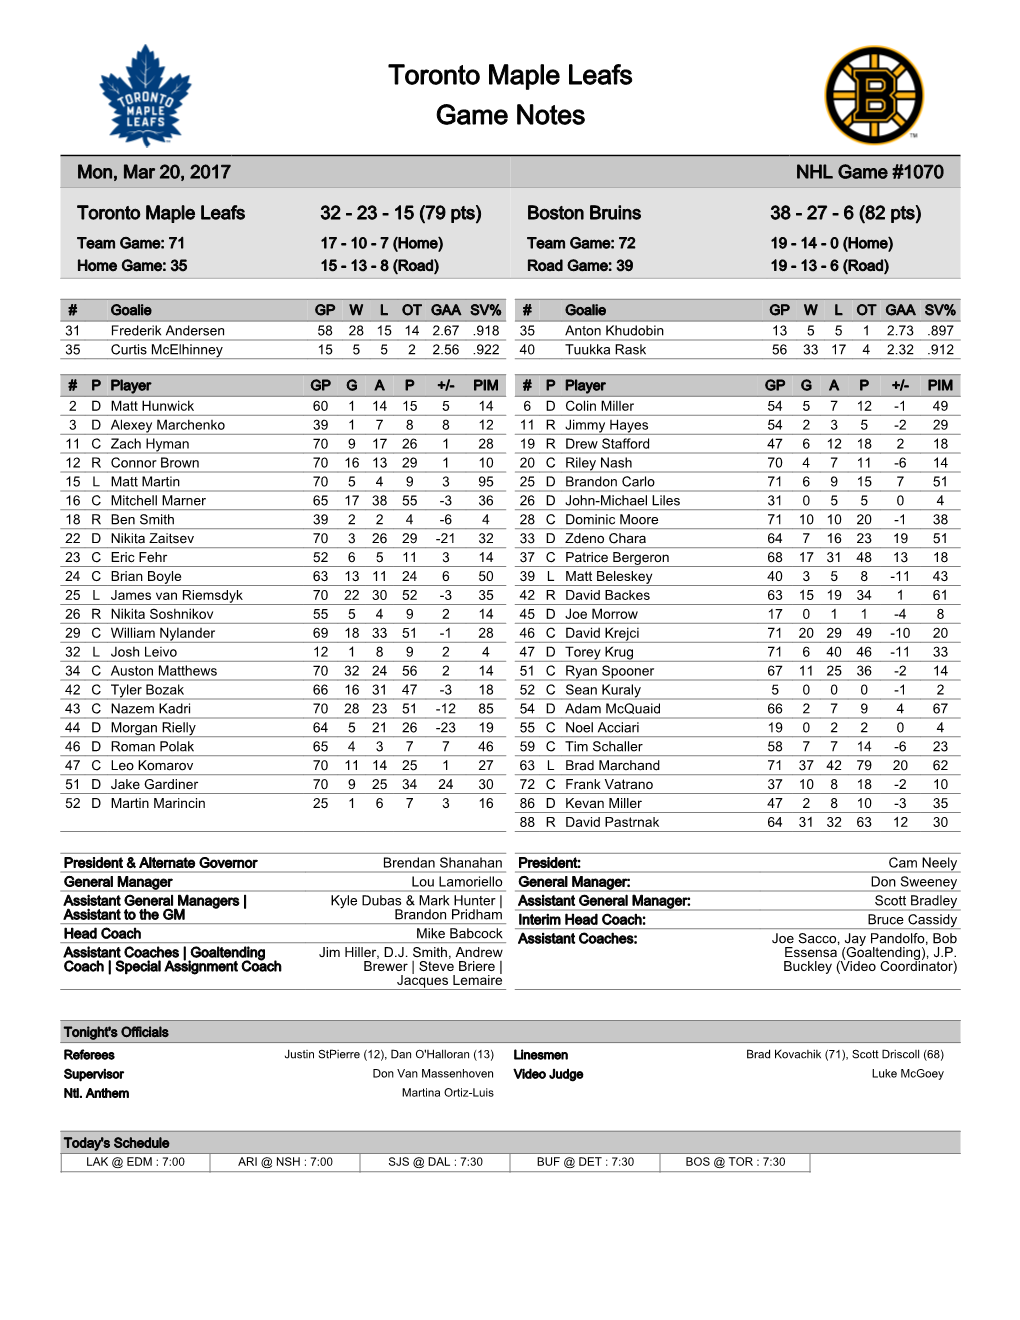 Toronto Maple Leafs Game Notes